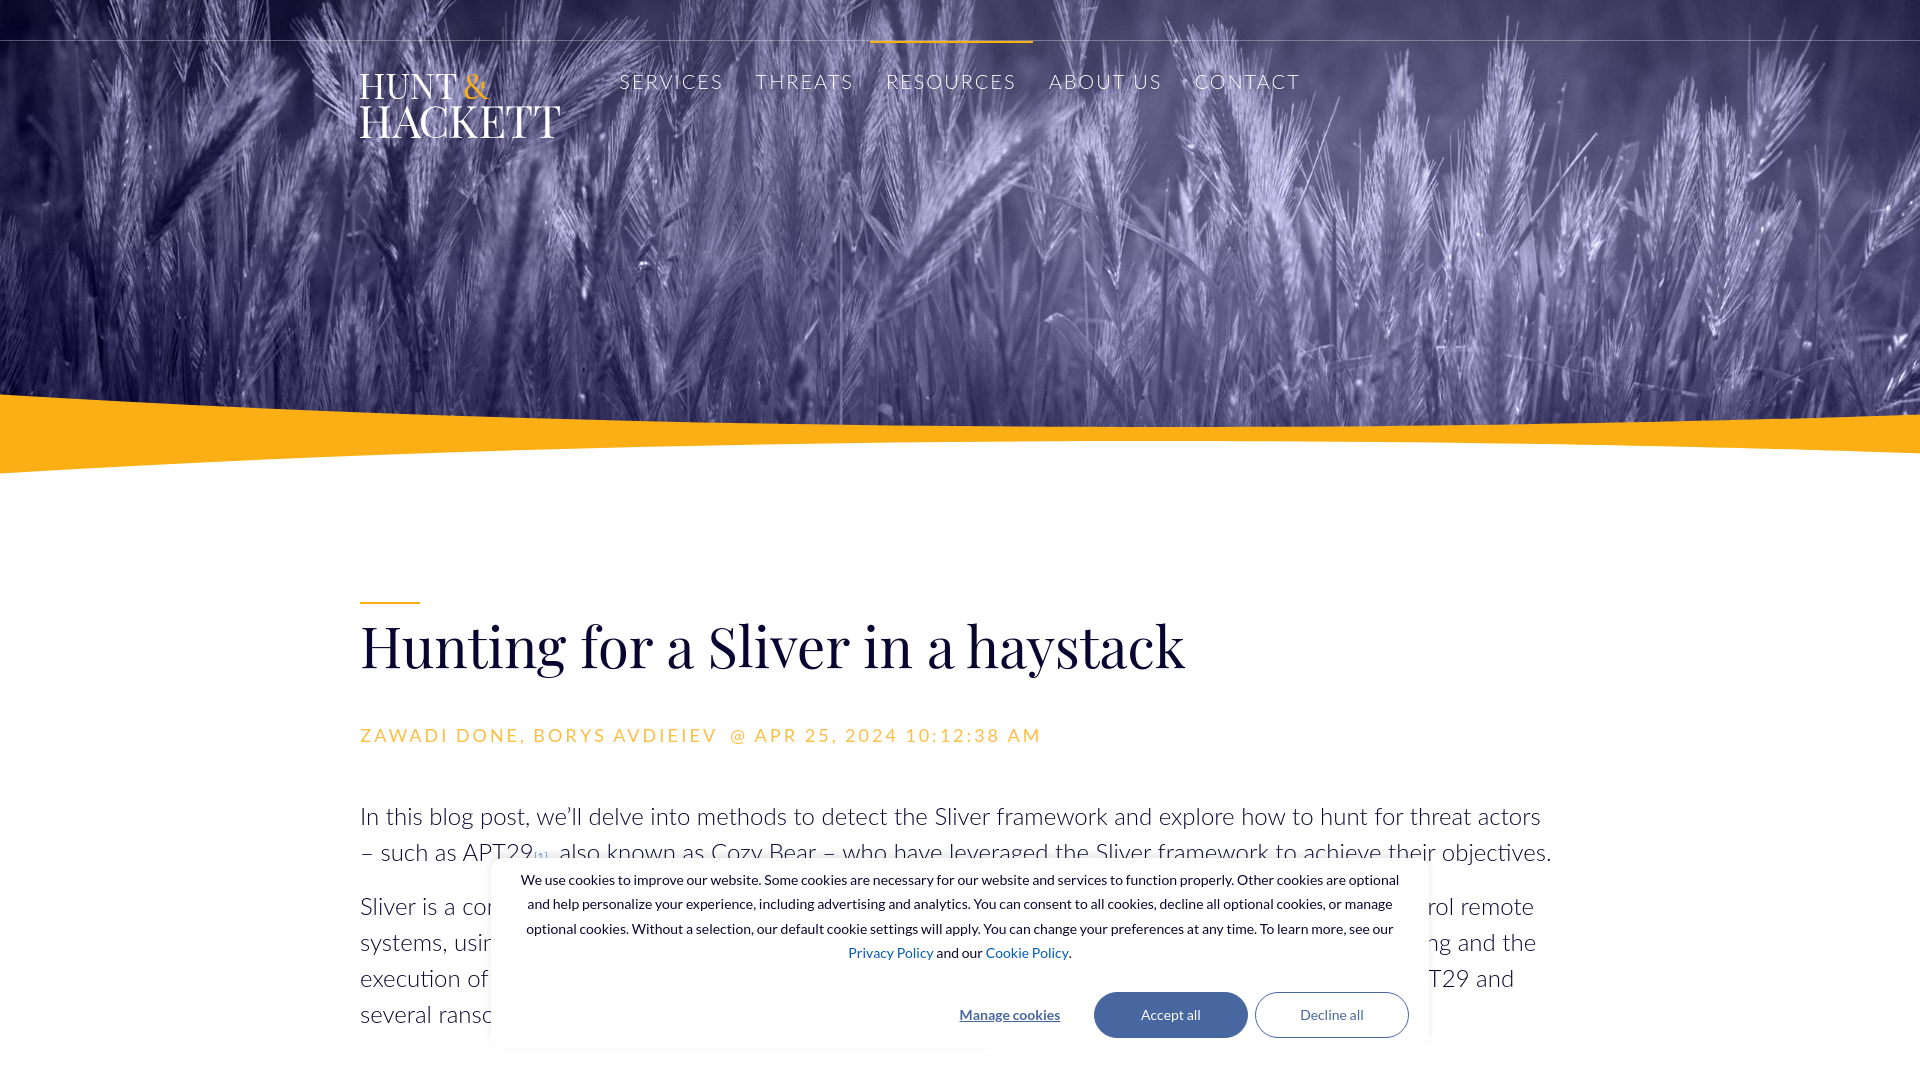 Hunting for a Sliver in a haystack